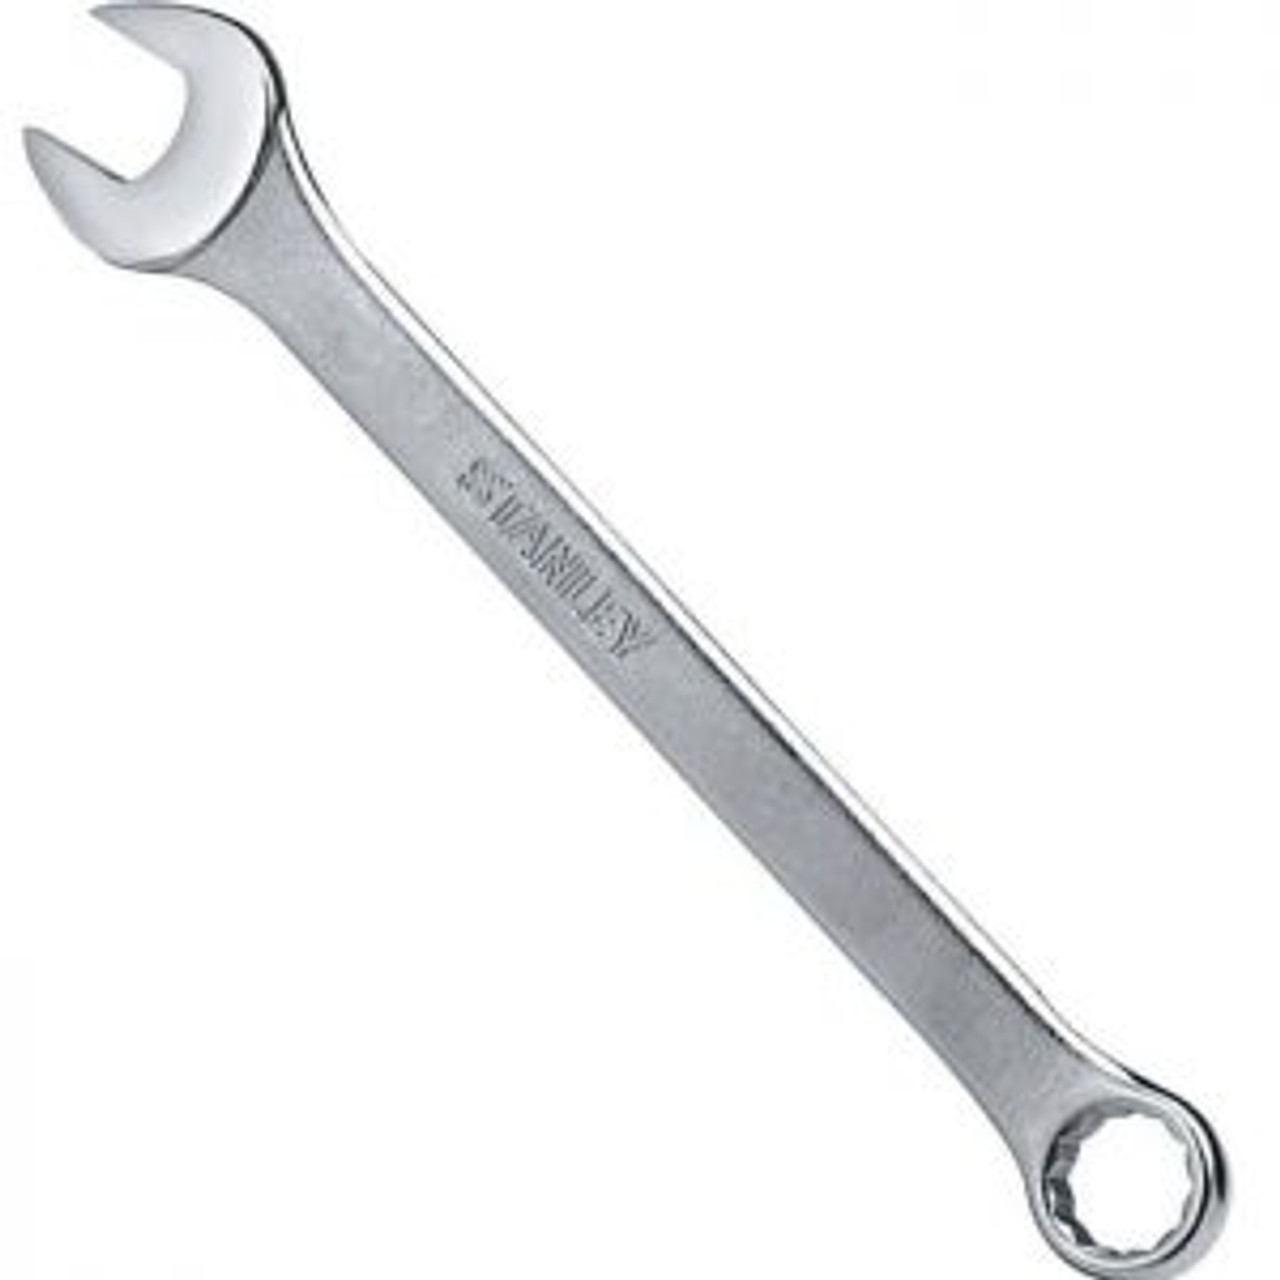 Combination-Wrench-Basic-28mm-STMT80243-8B-producttype_4424__27594